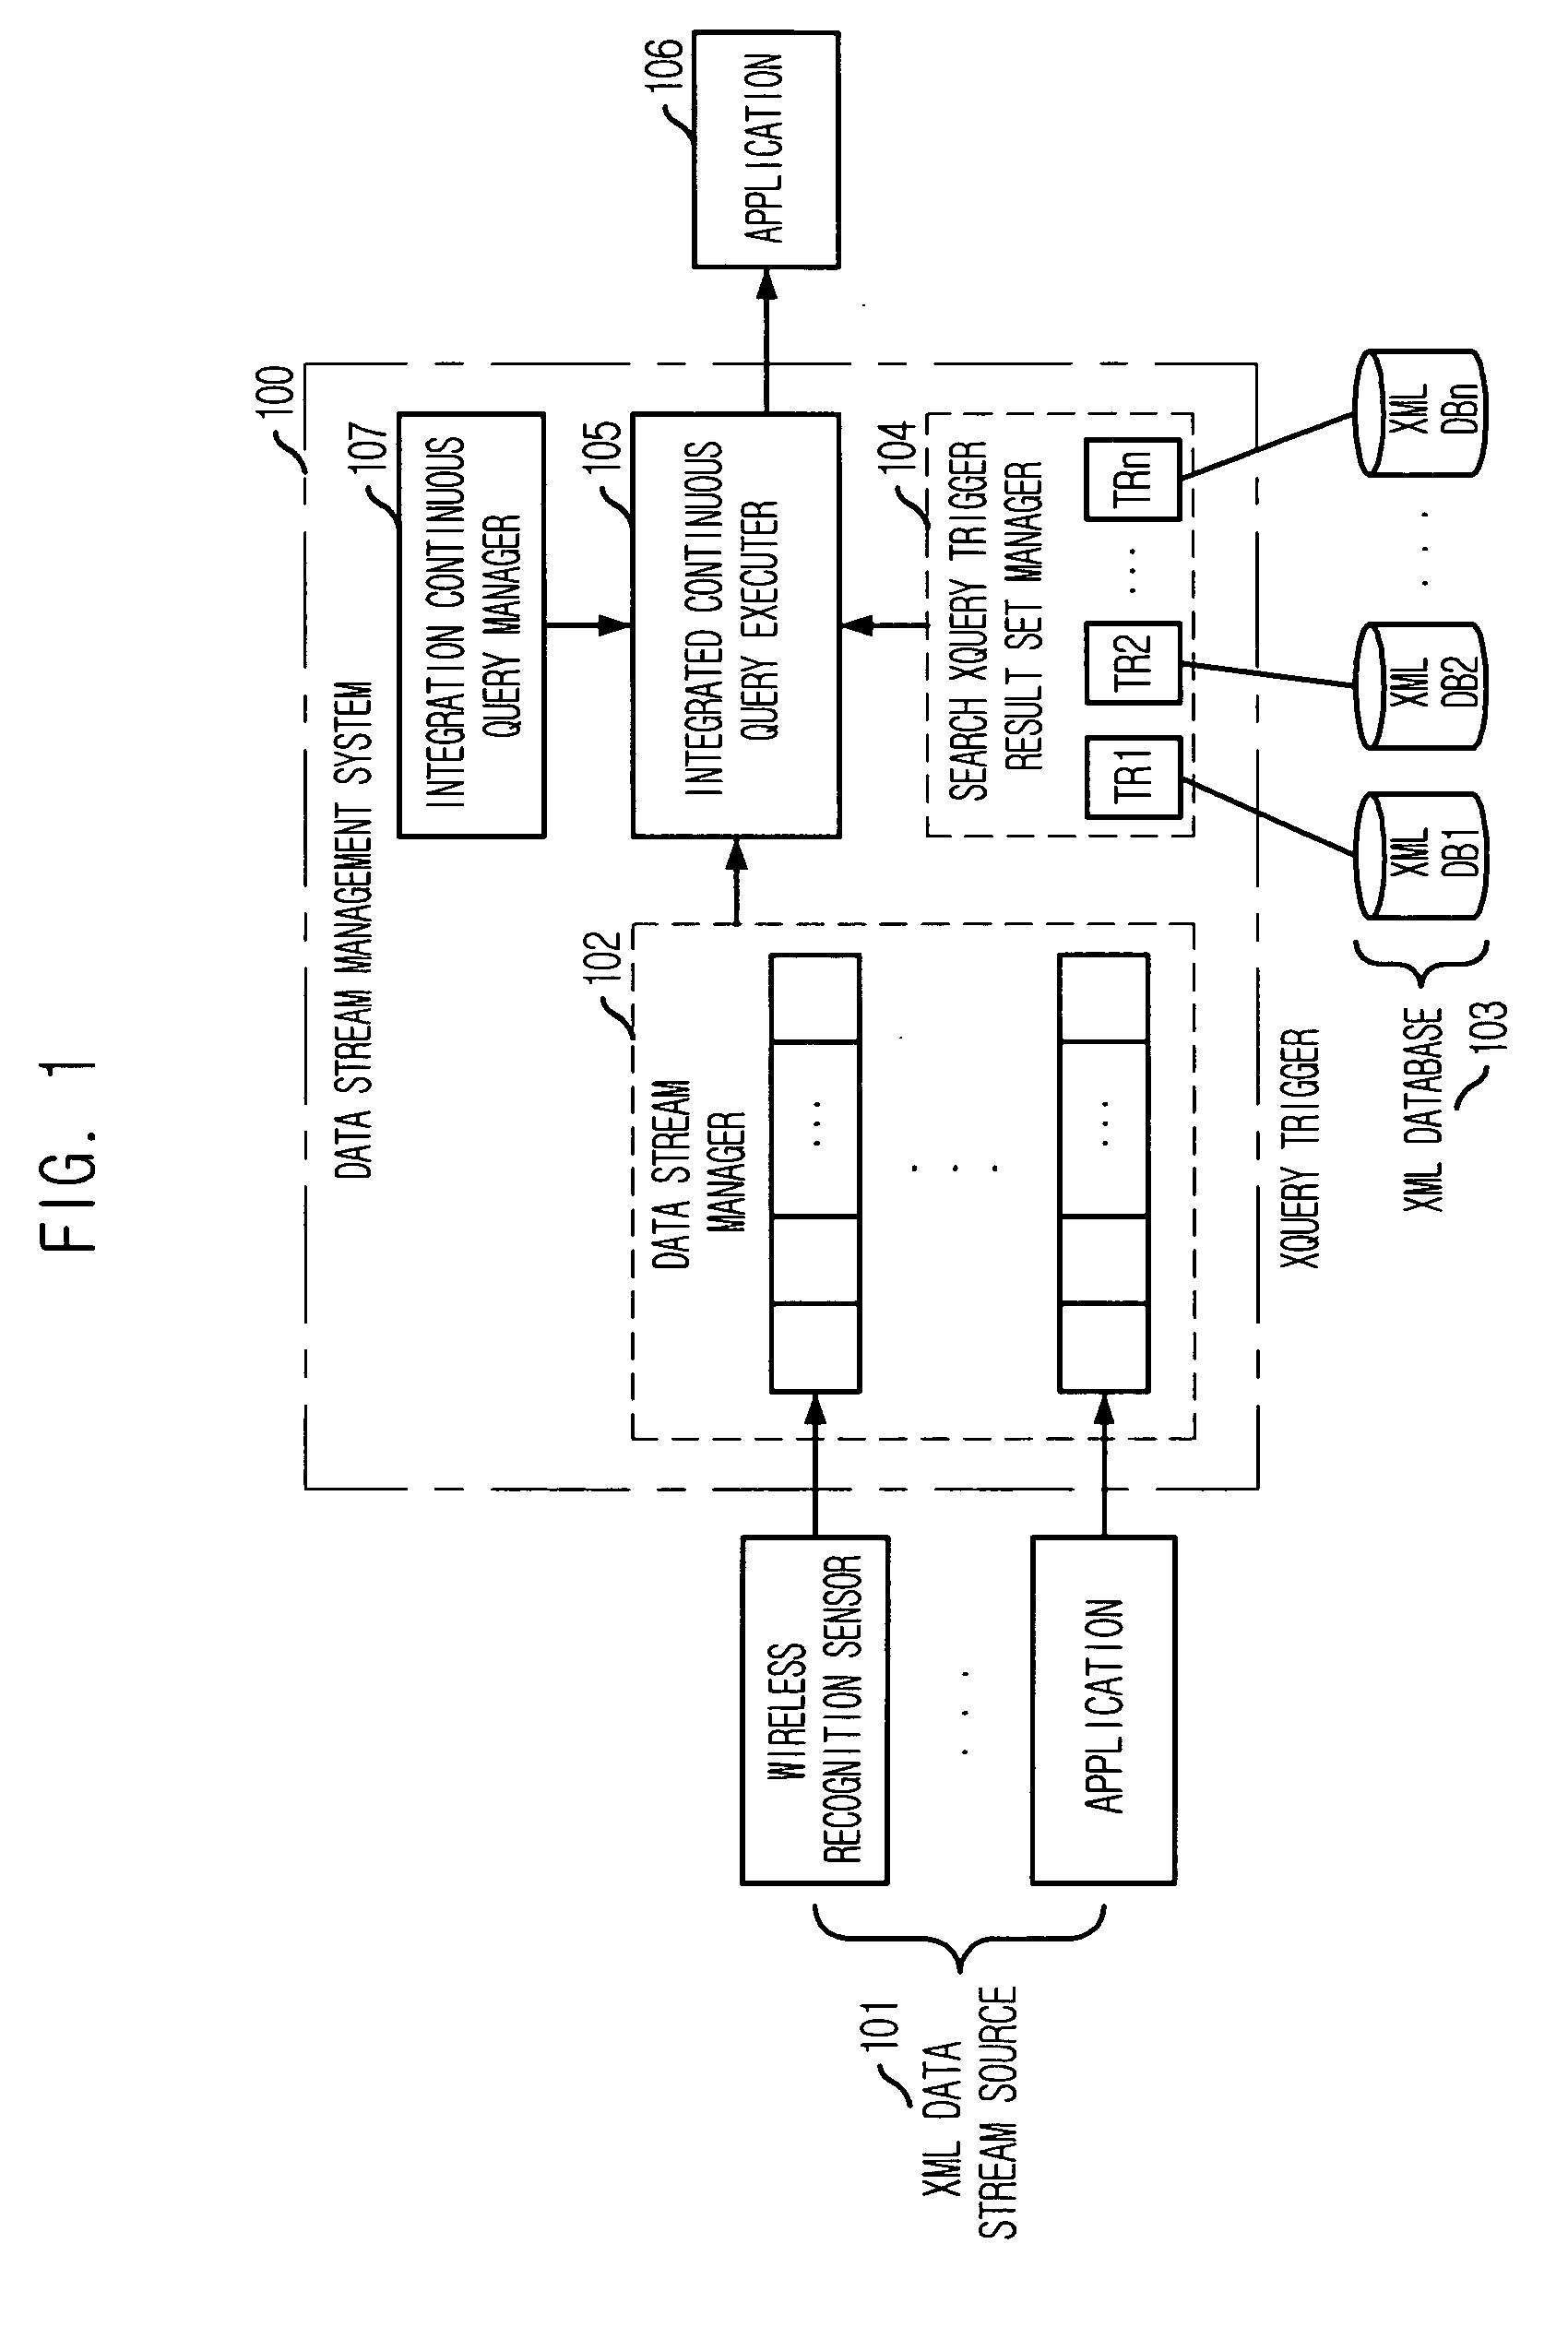 System and method for processing integrated queries against input data stream and data stored in database using trigger